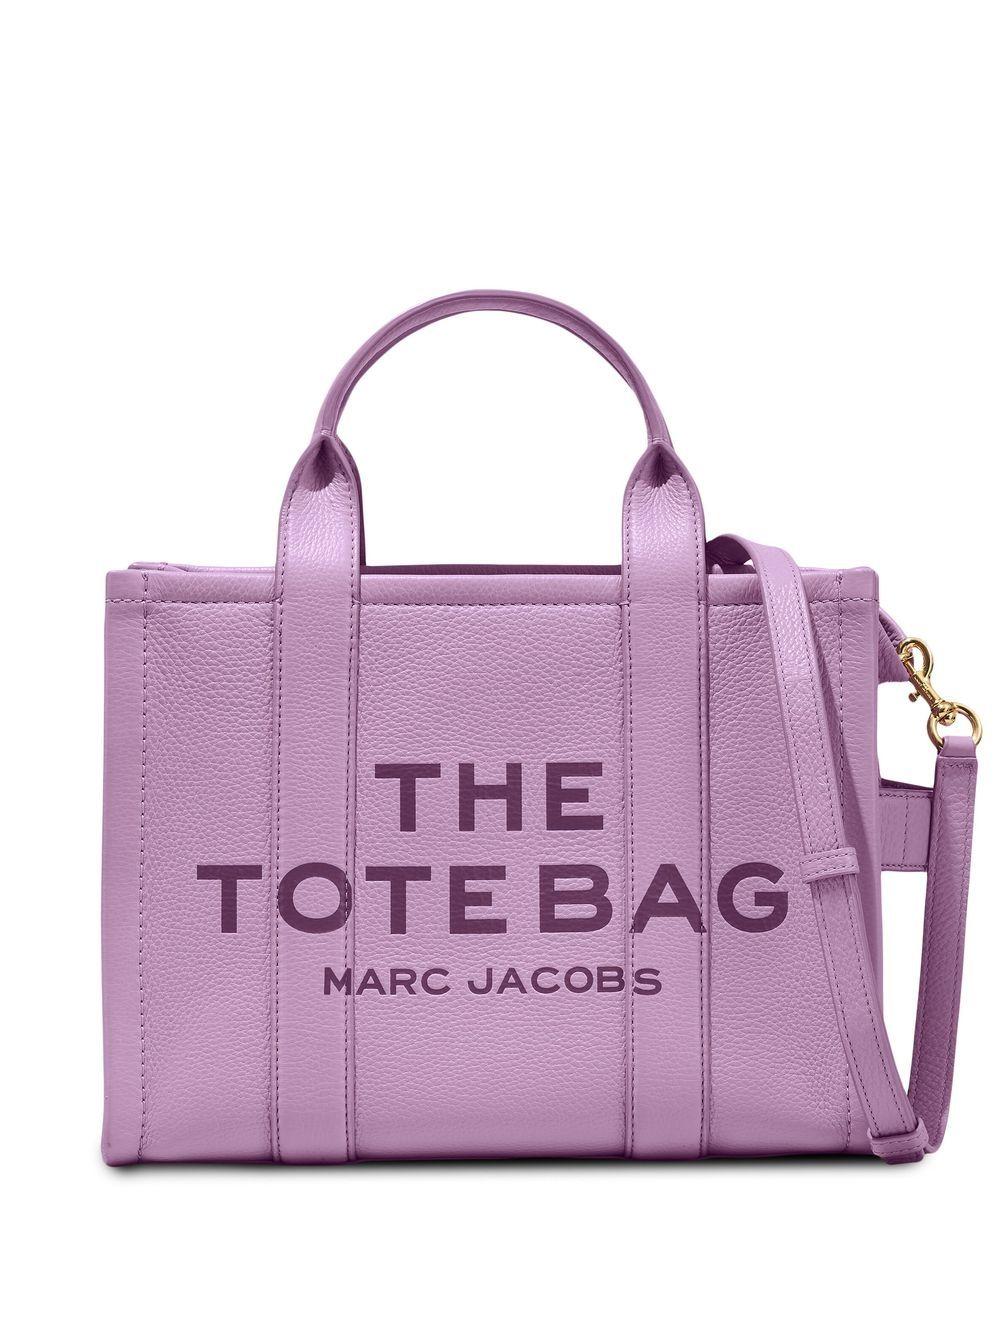 Marc Jacobs The Leather Small Tote Bag in Purple | Lyst